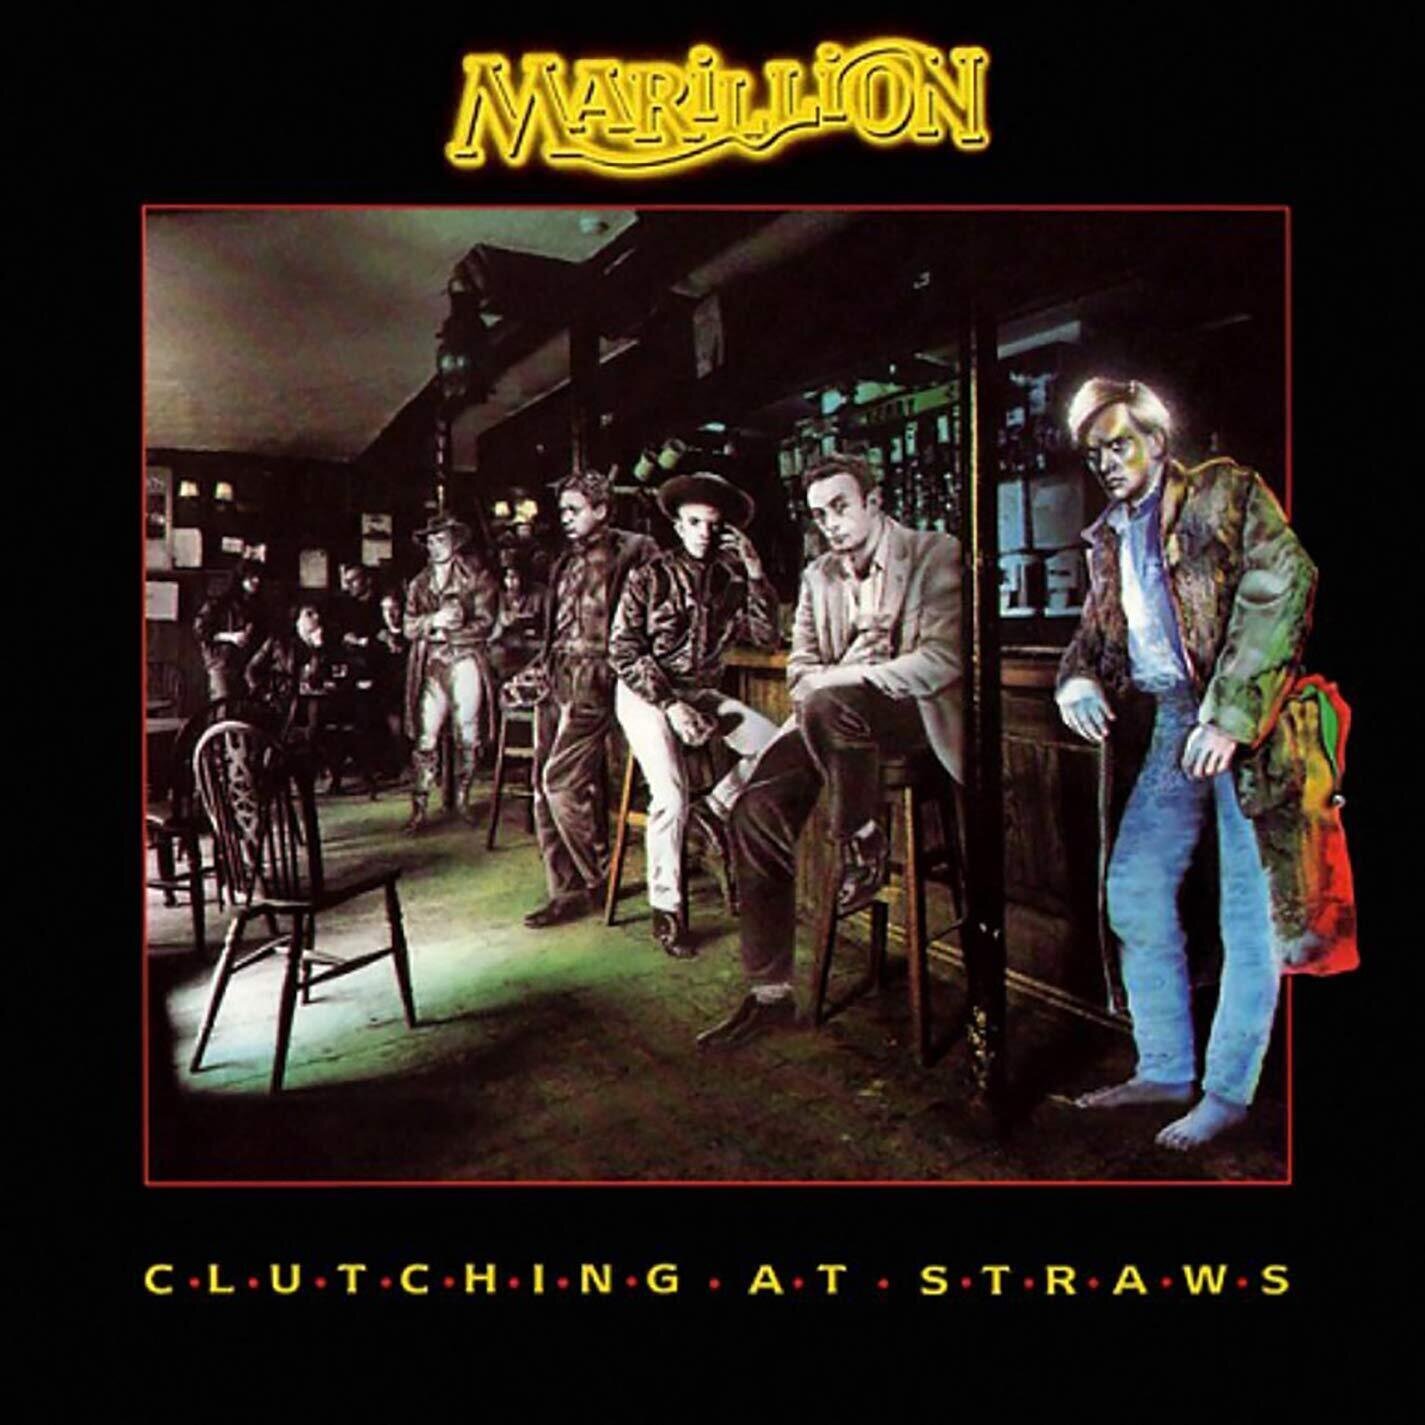 LP ploča Marillion - Clutching At Straws (Deluxe Edition) (5 LP)